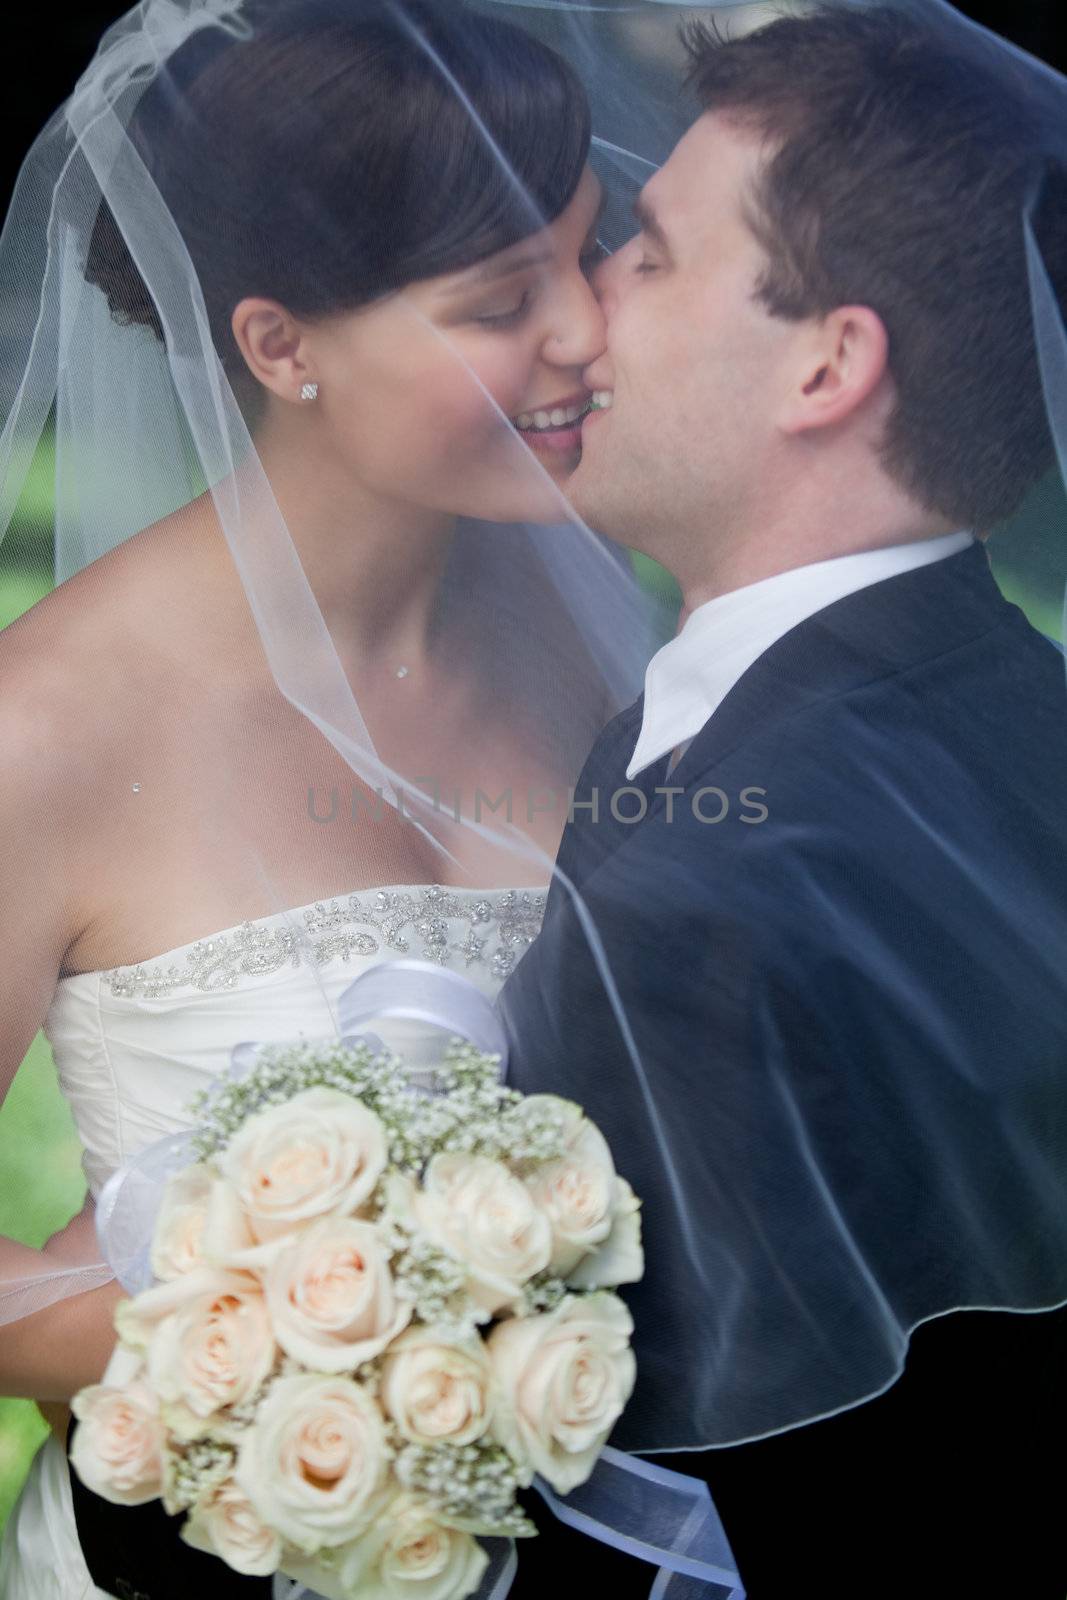 Newlywed Couple Kissing Each Other Holding Flower Bouquet In Hand.